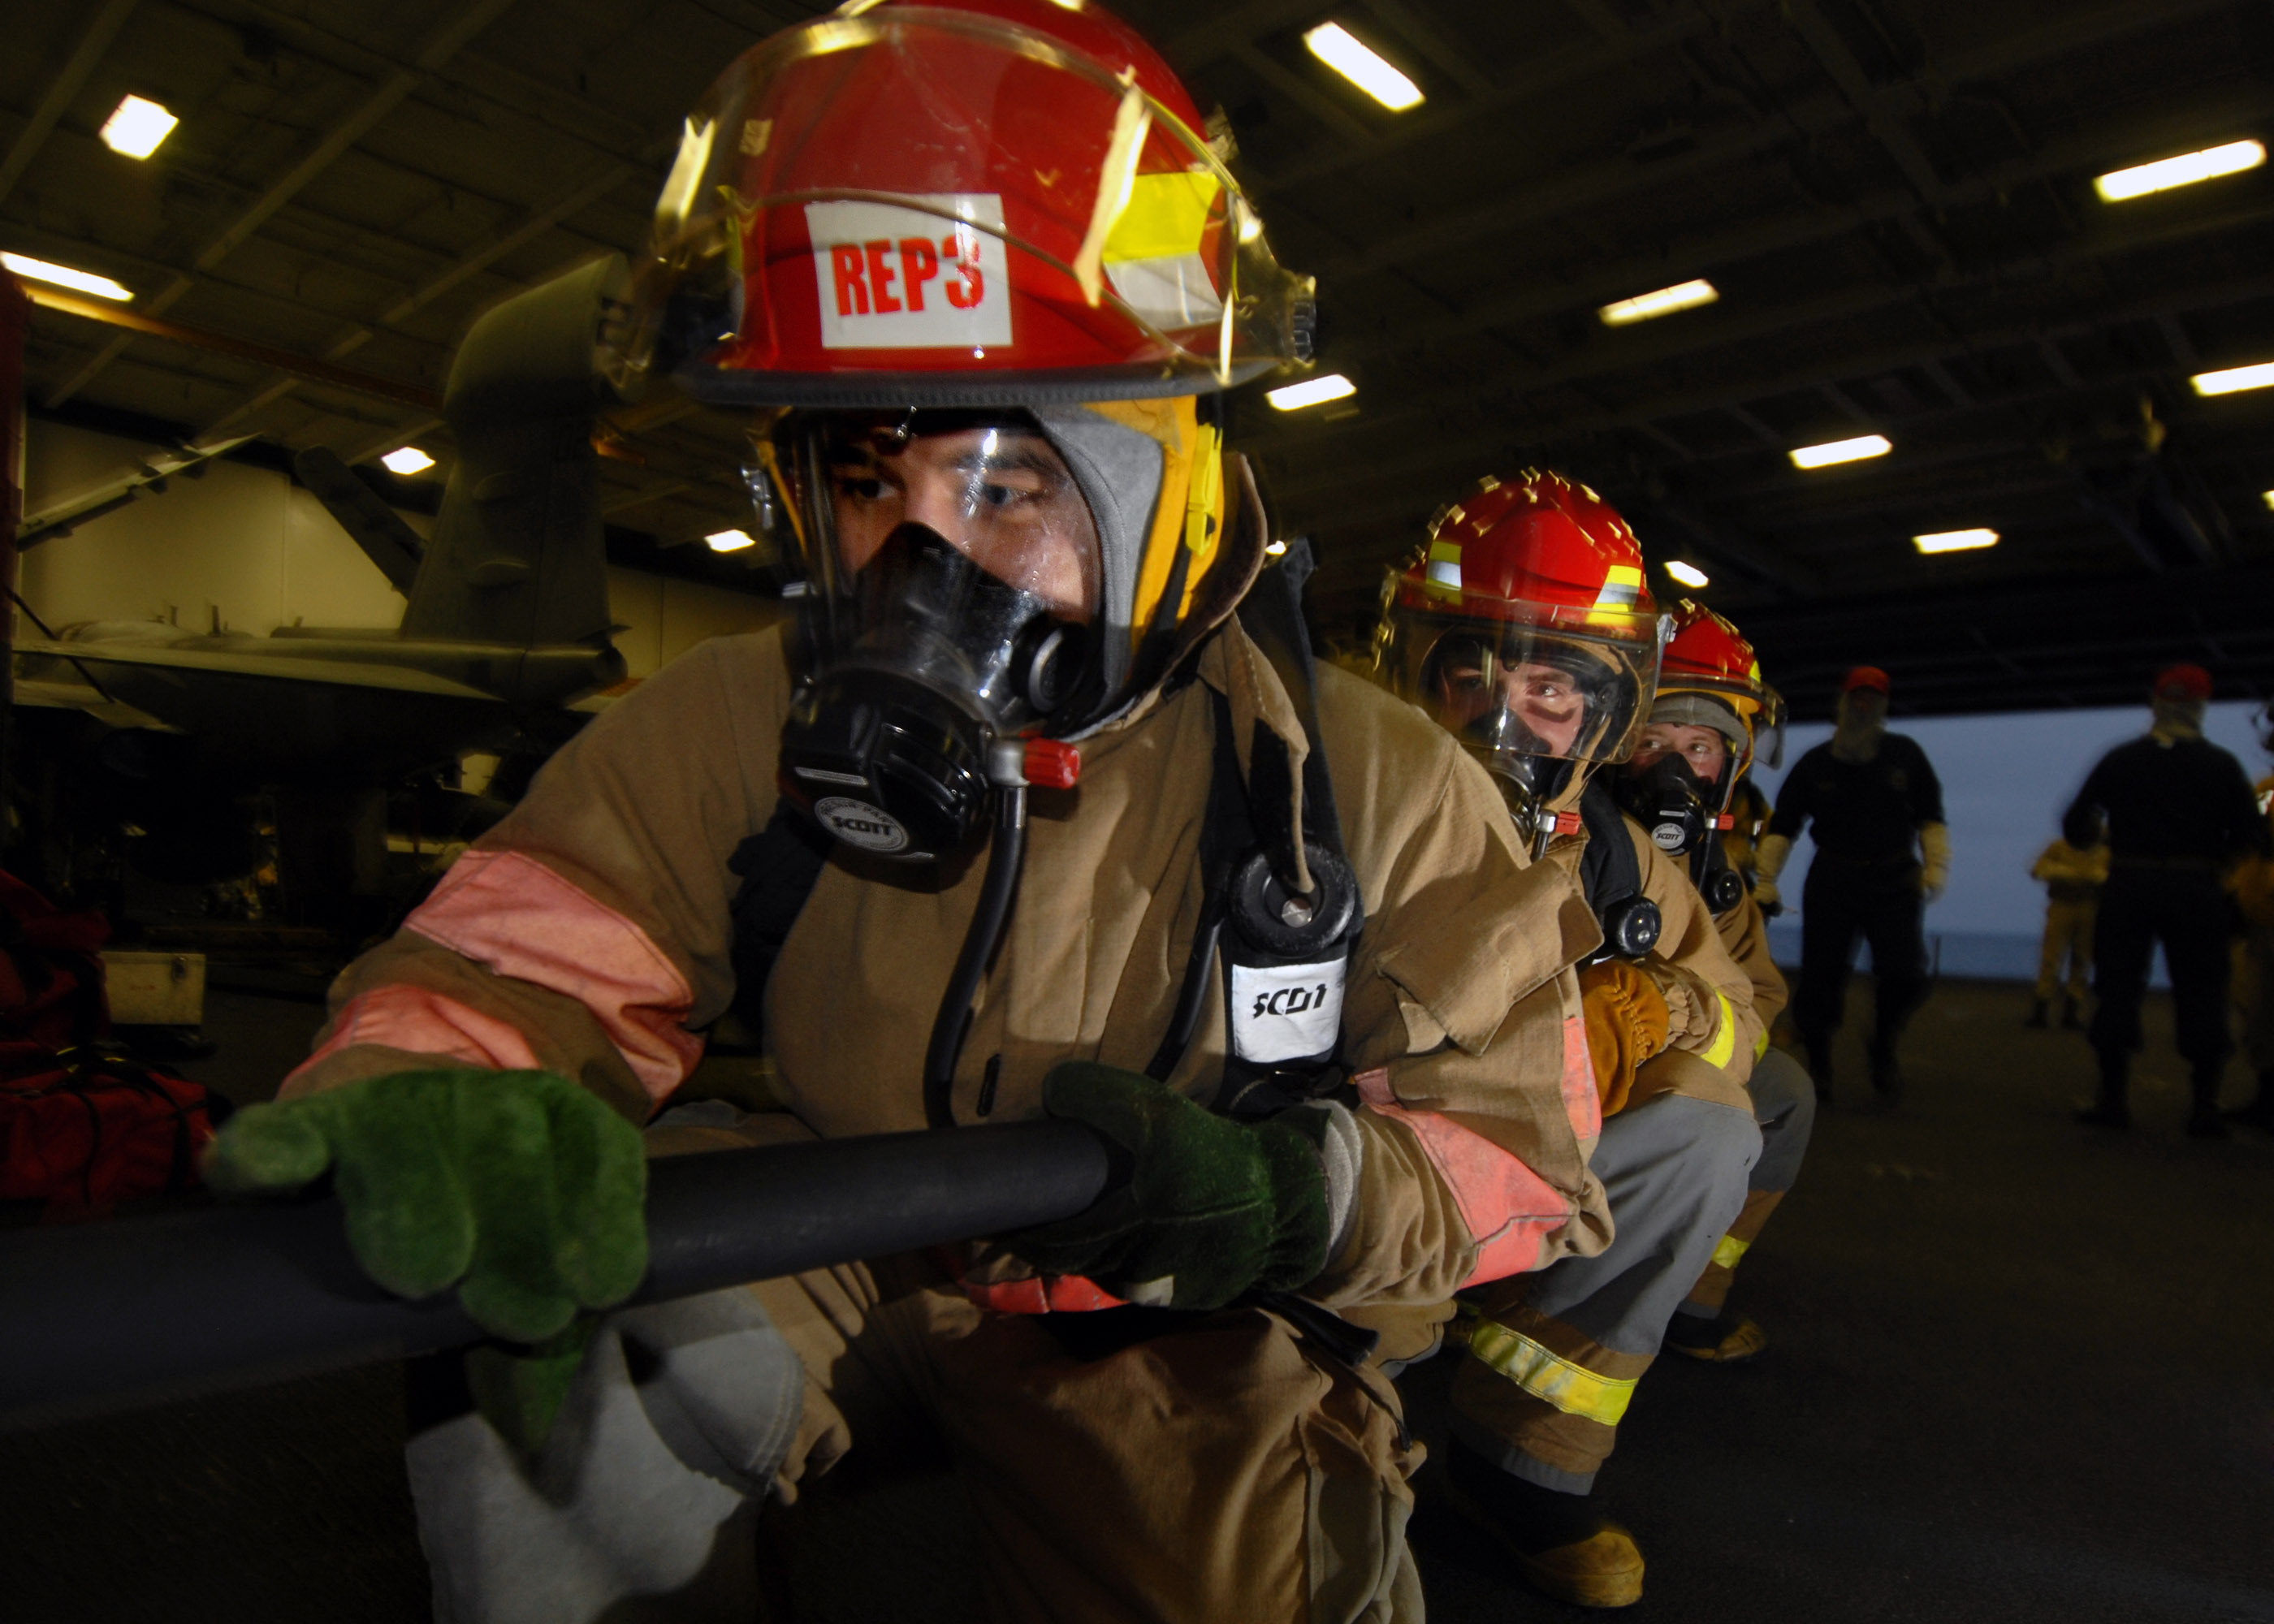 US Navy 070804-N-7981E-190 Members of a repair locker hose team advance on a simulated fire in the hangar bay of Nimitz-class aircraft carrier USS Abraham Lincoln (CVN 72), during a General Quarters (GQ) drill